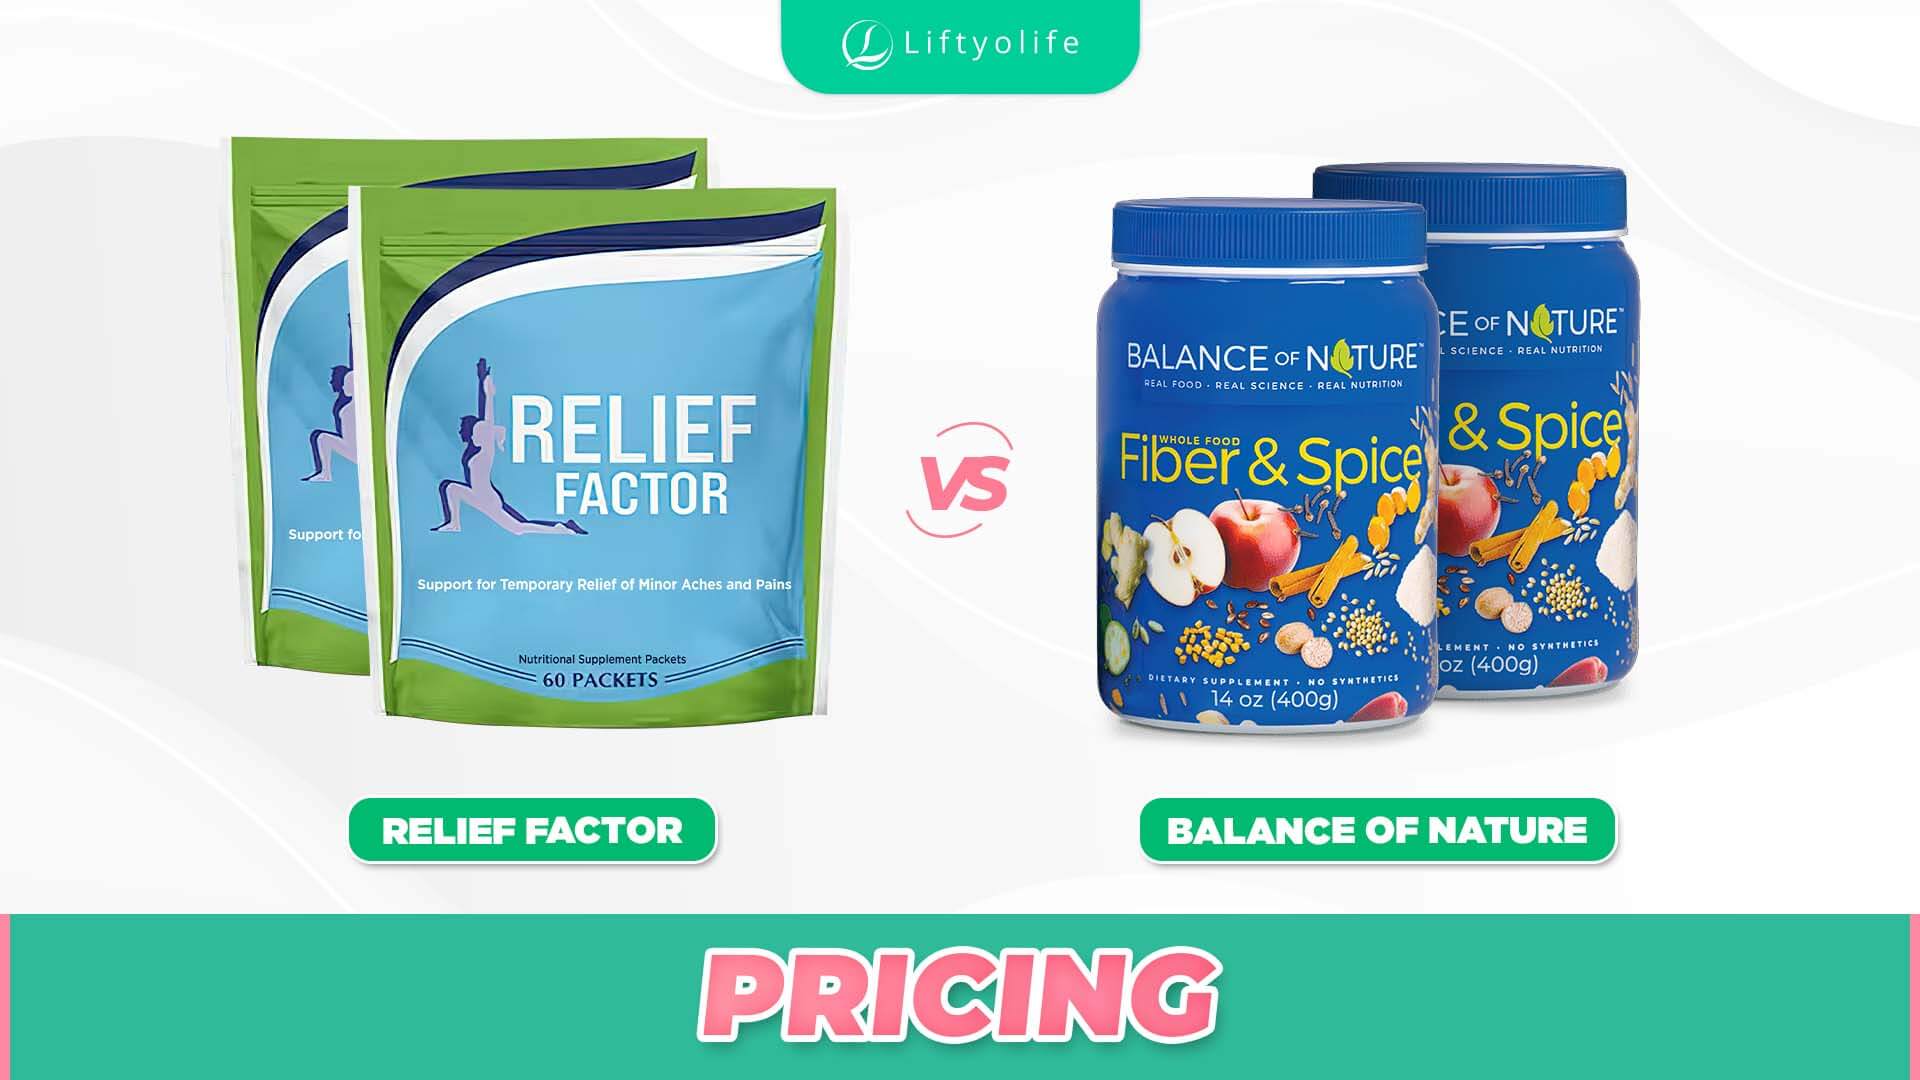 Balance Of Nature Vs Relief Factor: The Pricing